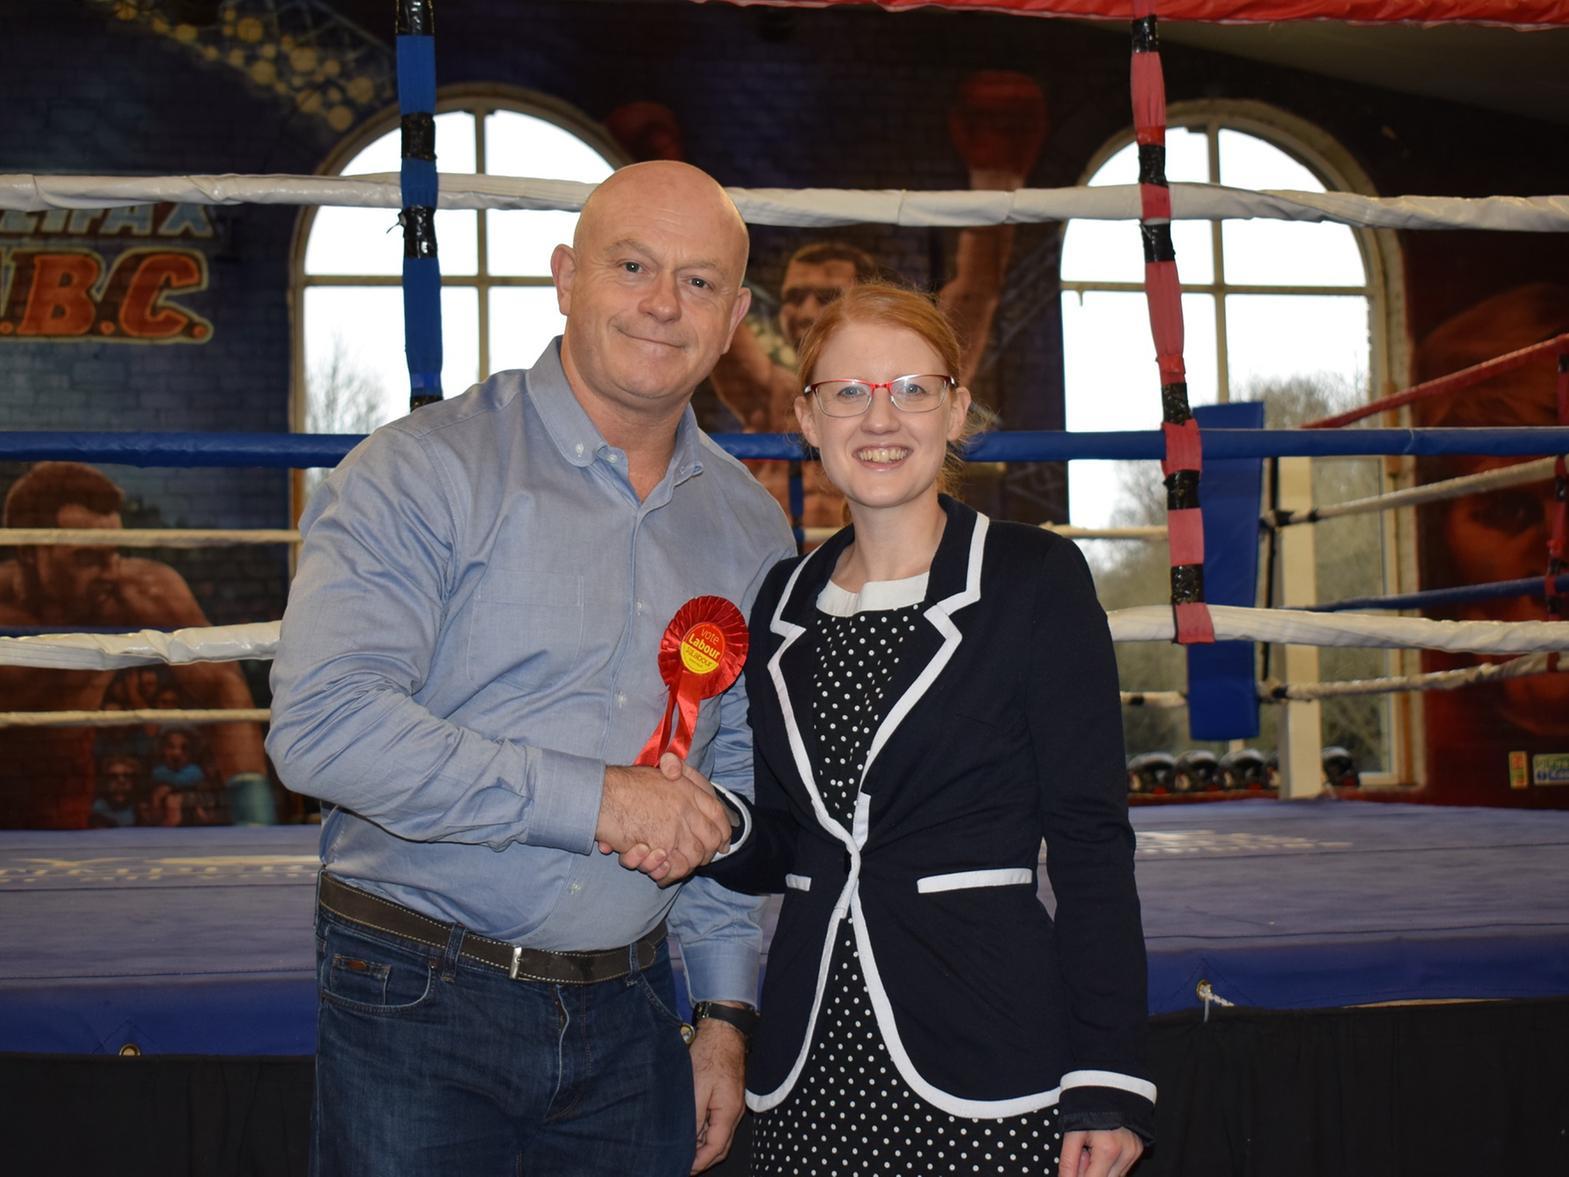 Ross Kemp has a final photo with Labour candidate for Halifax Holly Lynch